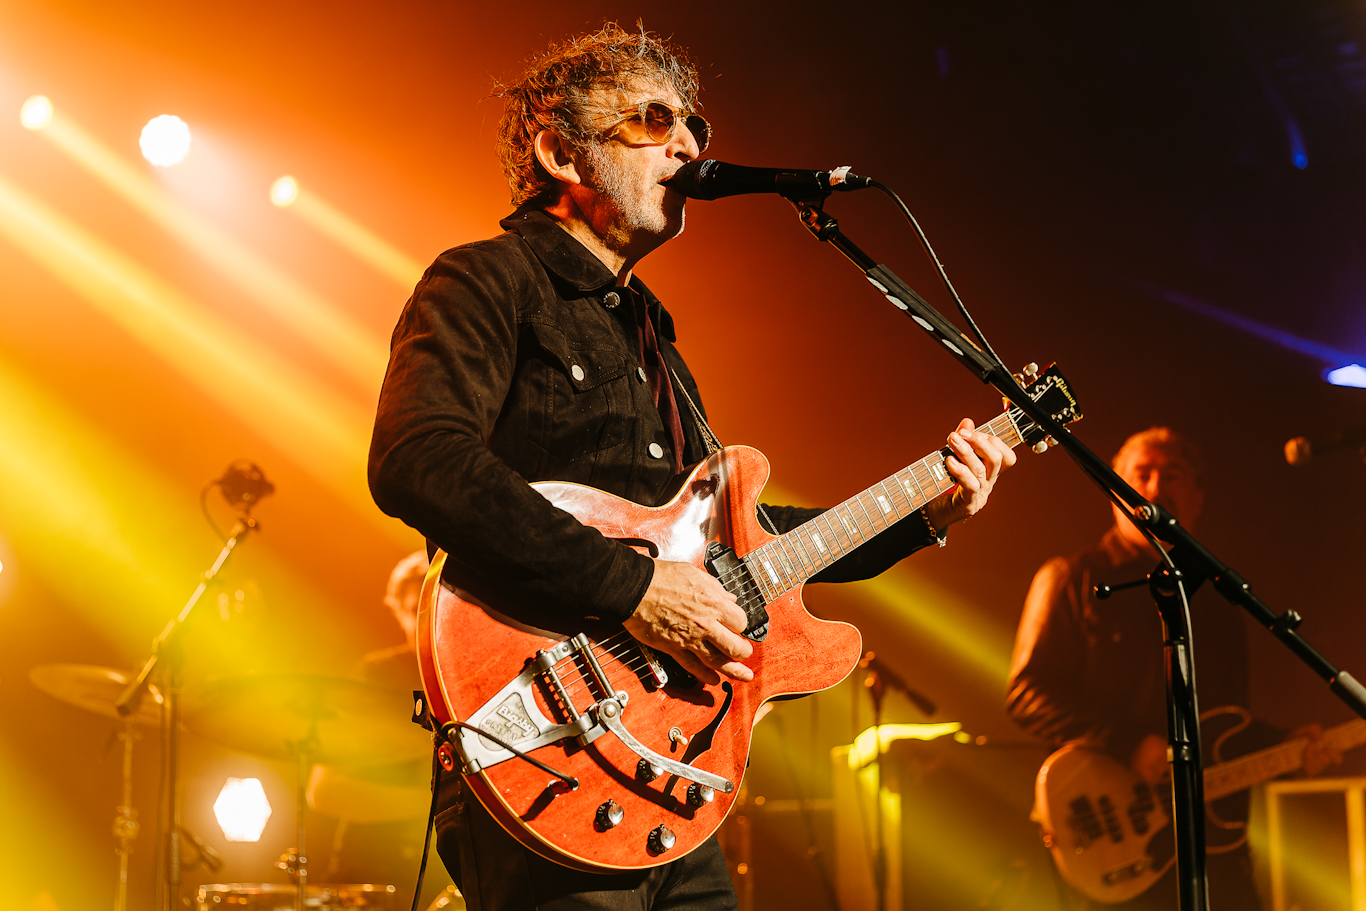 Lightning Seeds performing in concert at Boiler Shop, Newcastle upon Tyne